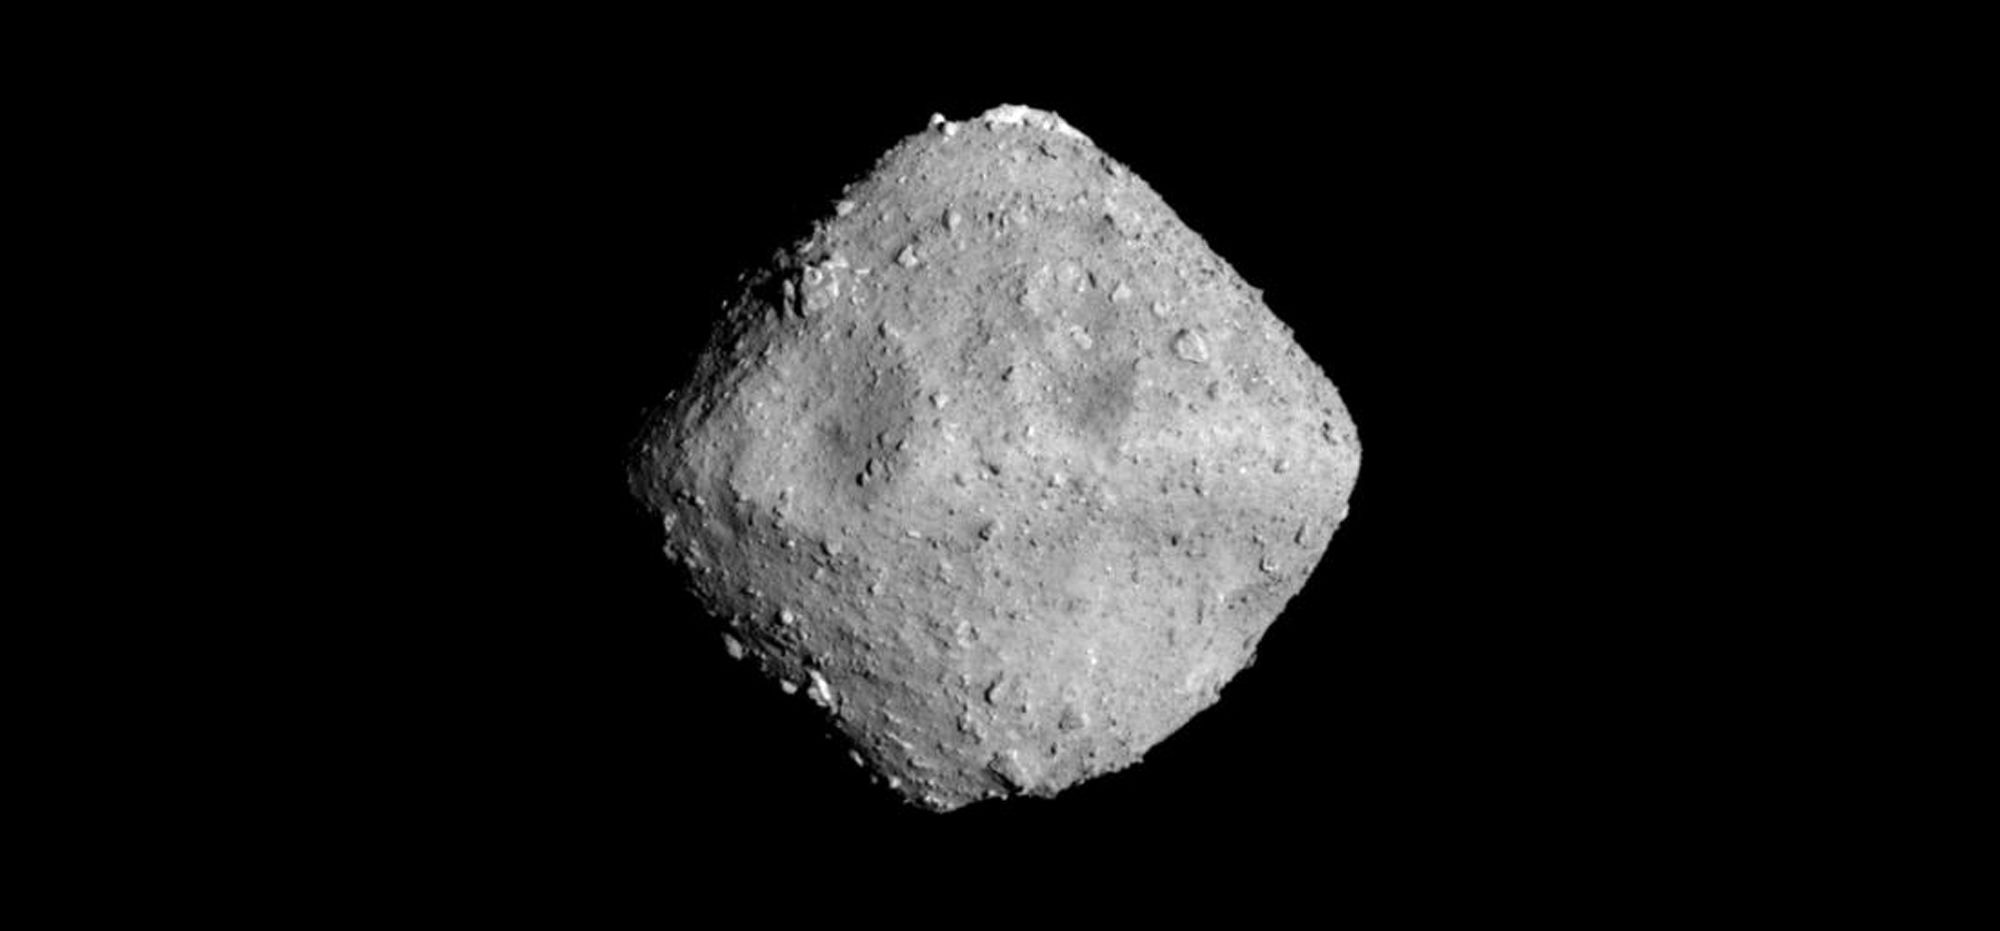 The small (<1 km wide) asteroid Ryugu, seen by the Hayabusa 2spacecraft when they were separated by 40 km. Credit: JAXA